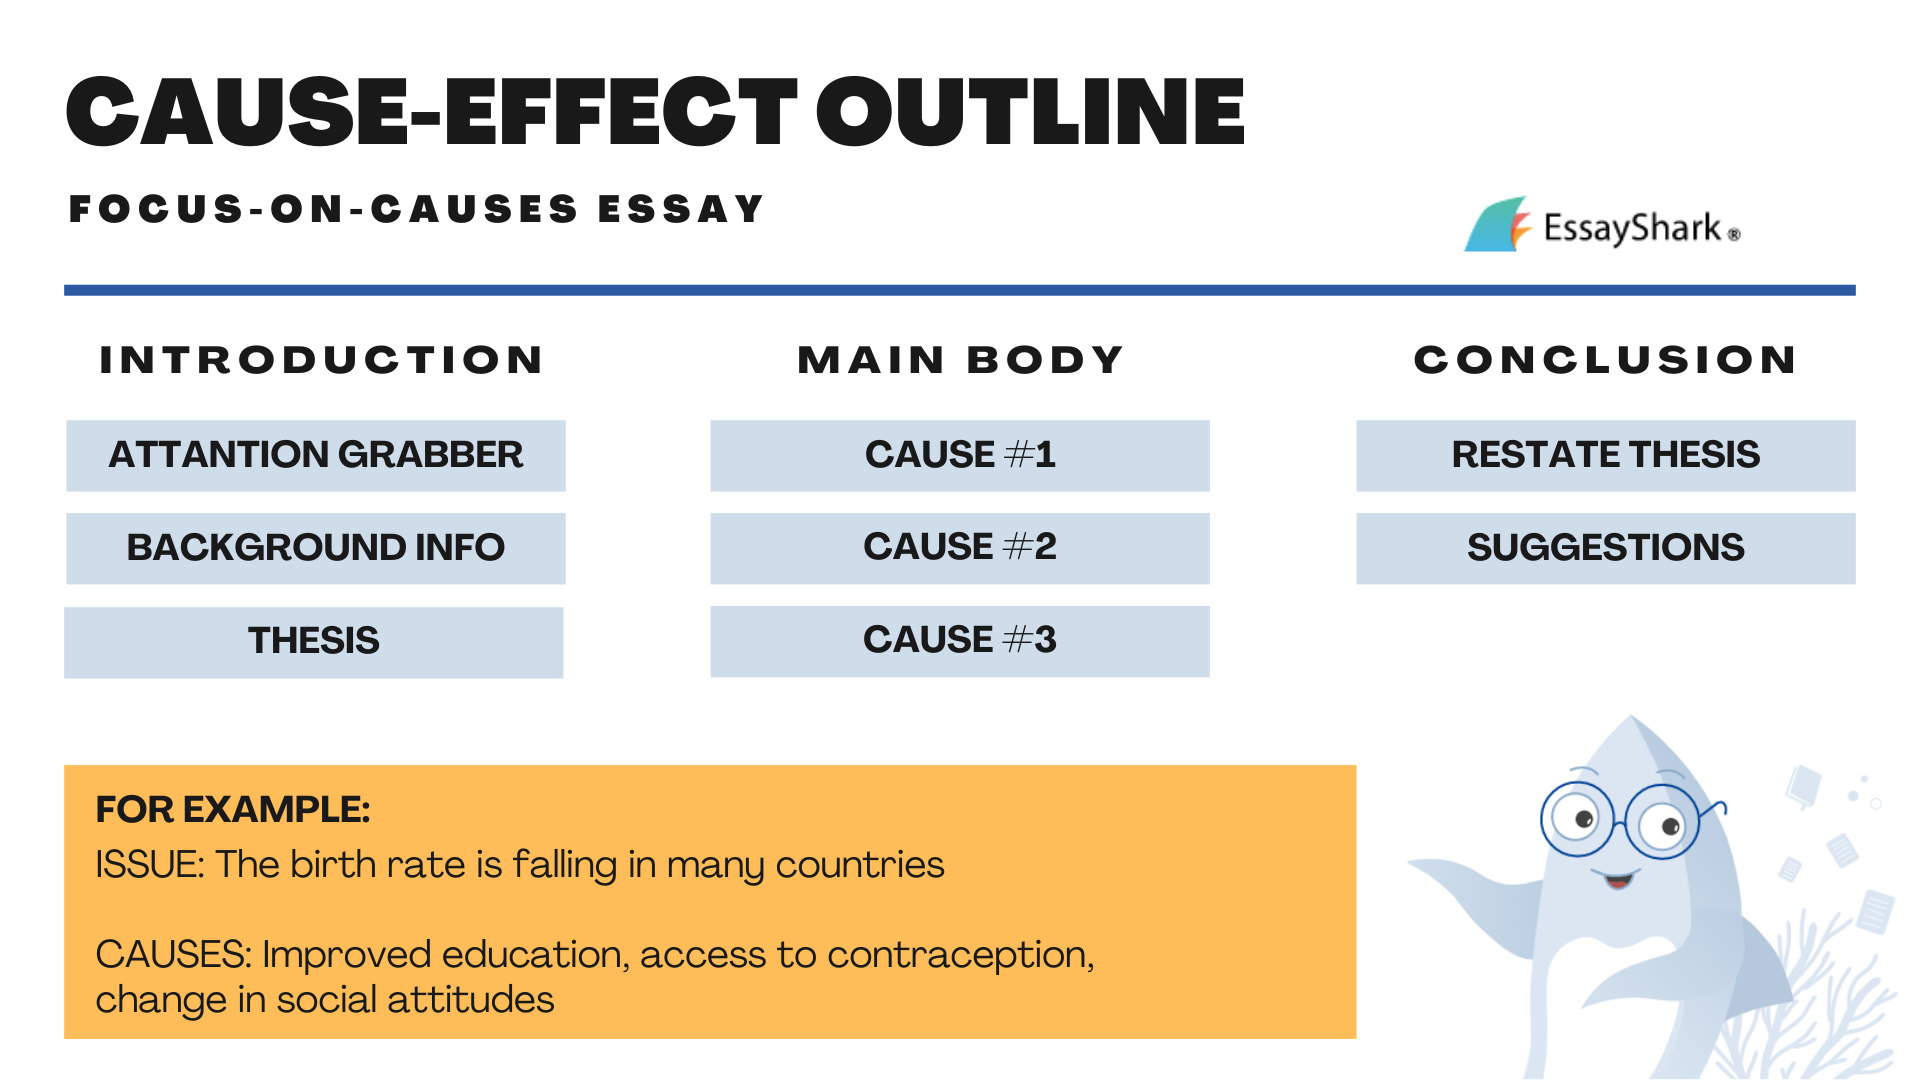 cause and effect outline with focus on causes